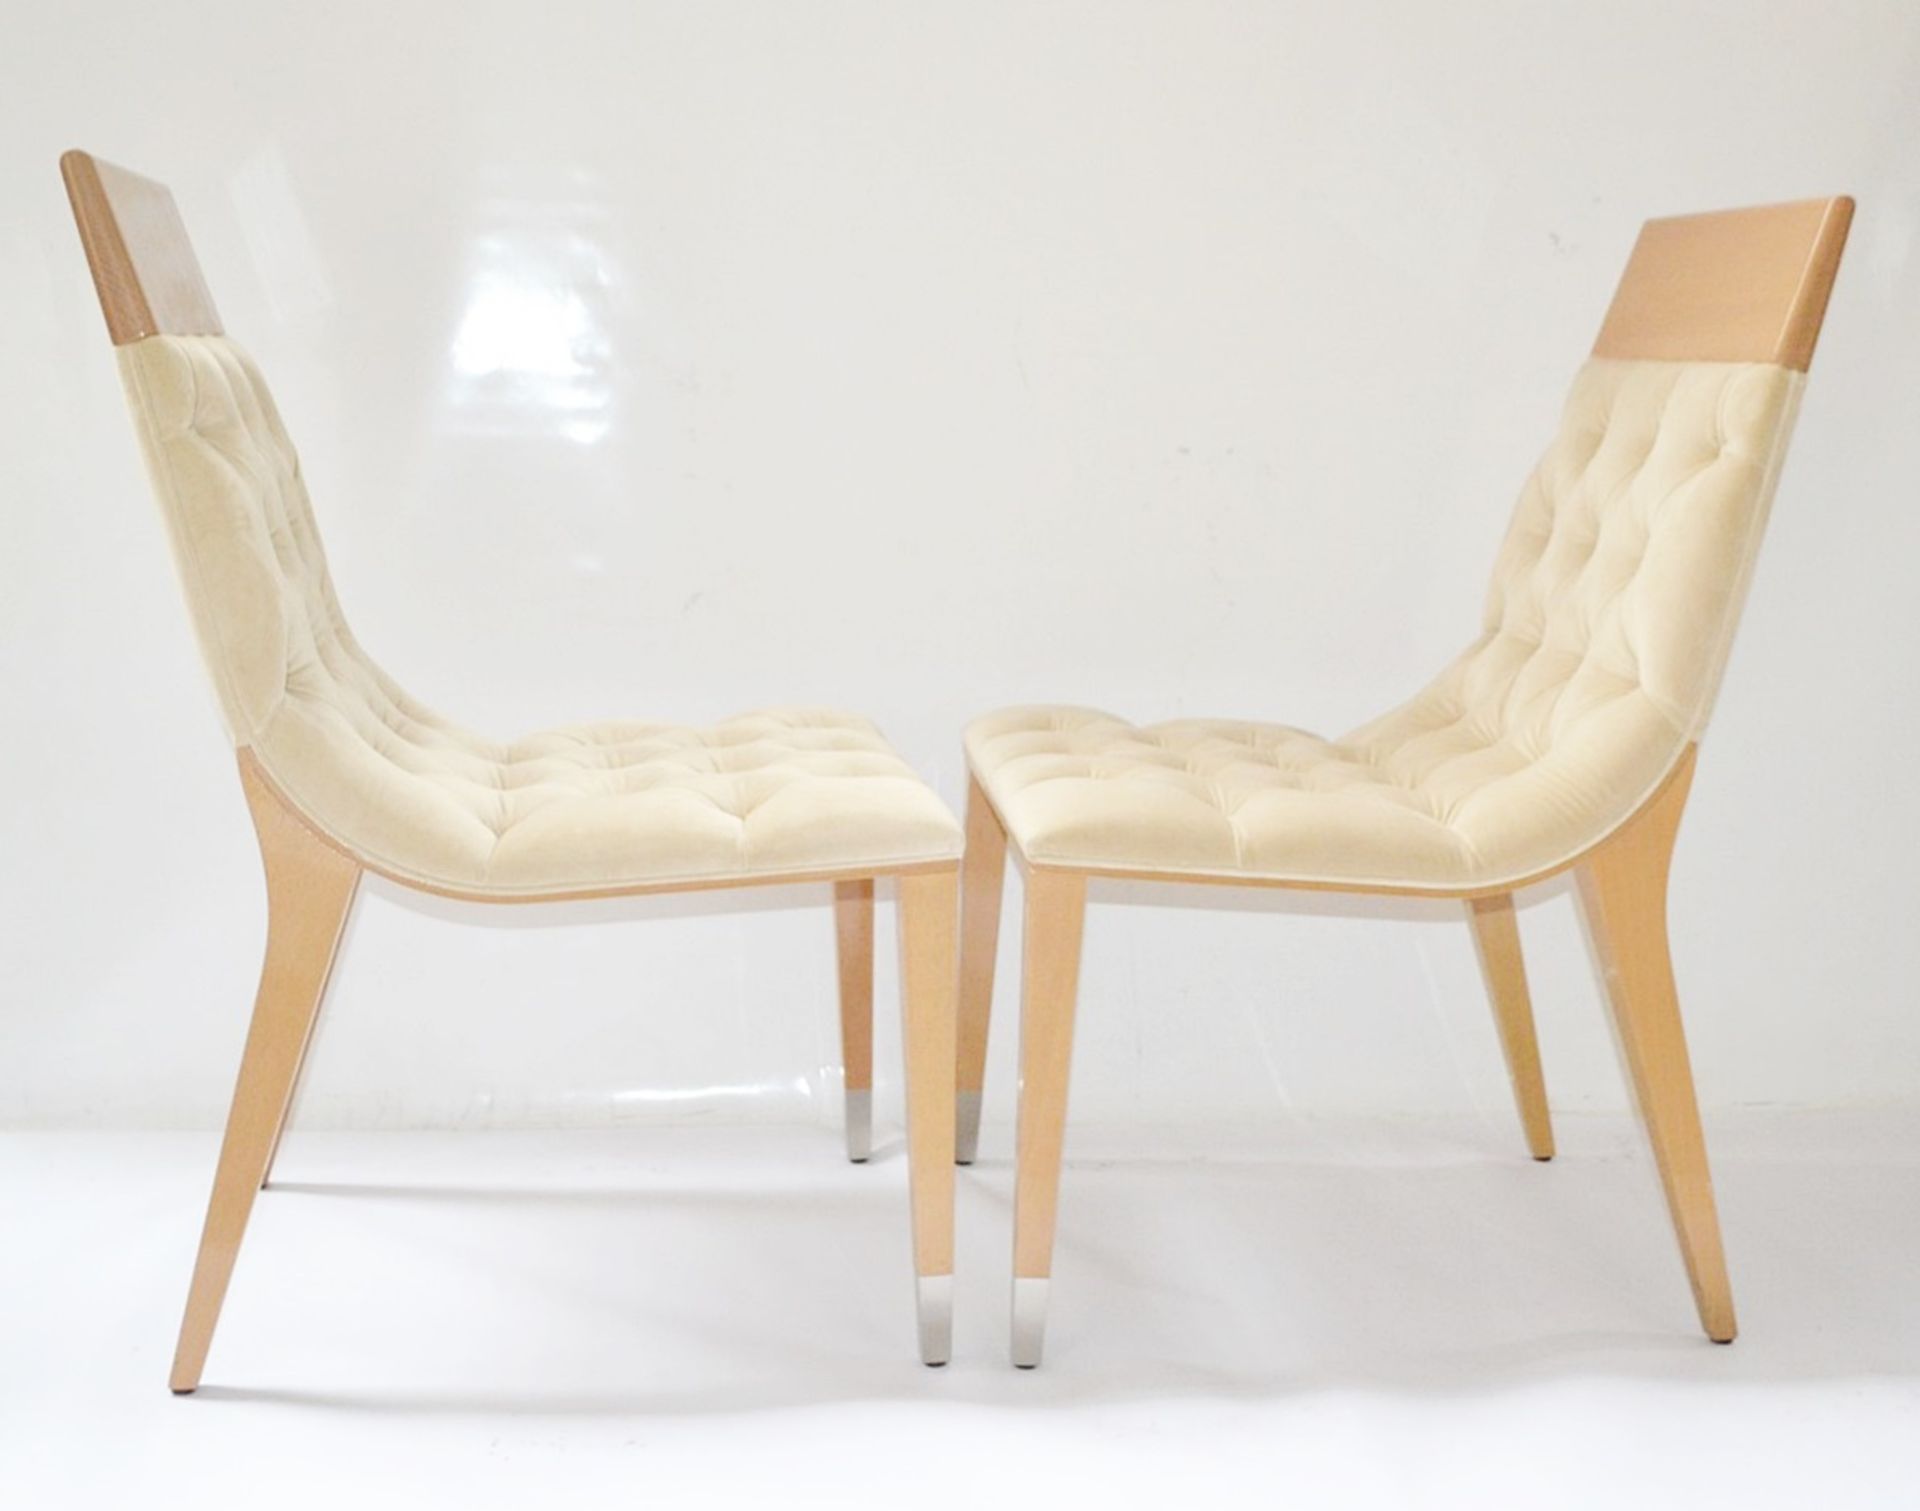 4 x GIORGIO COLLECTION 'Sunrise' Italian Designer Dining Chairs - Pre-owned In Good Condition - Image 3 of 14